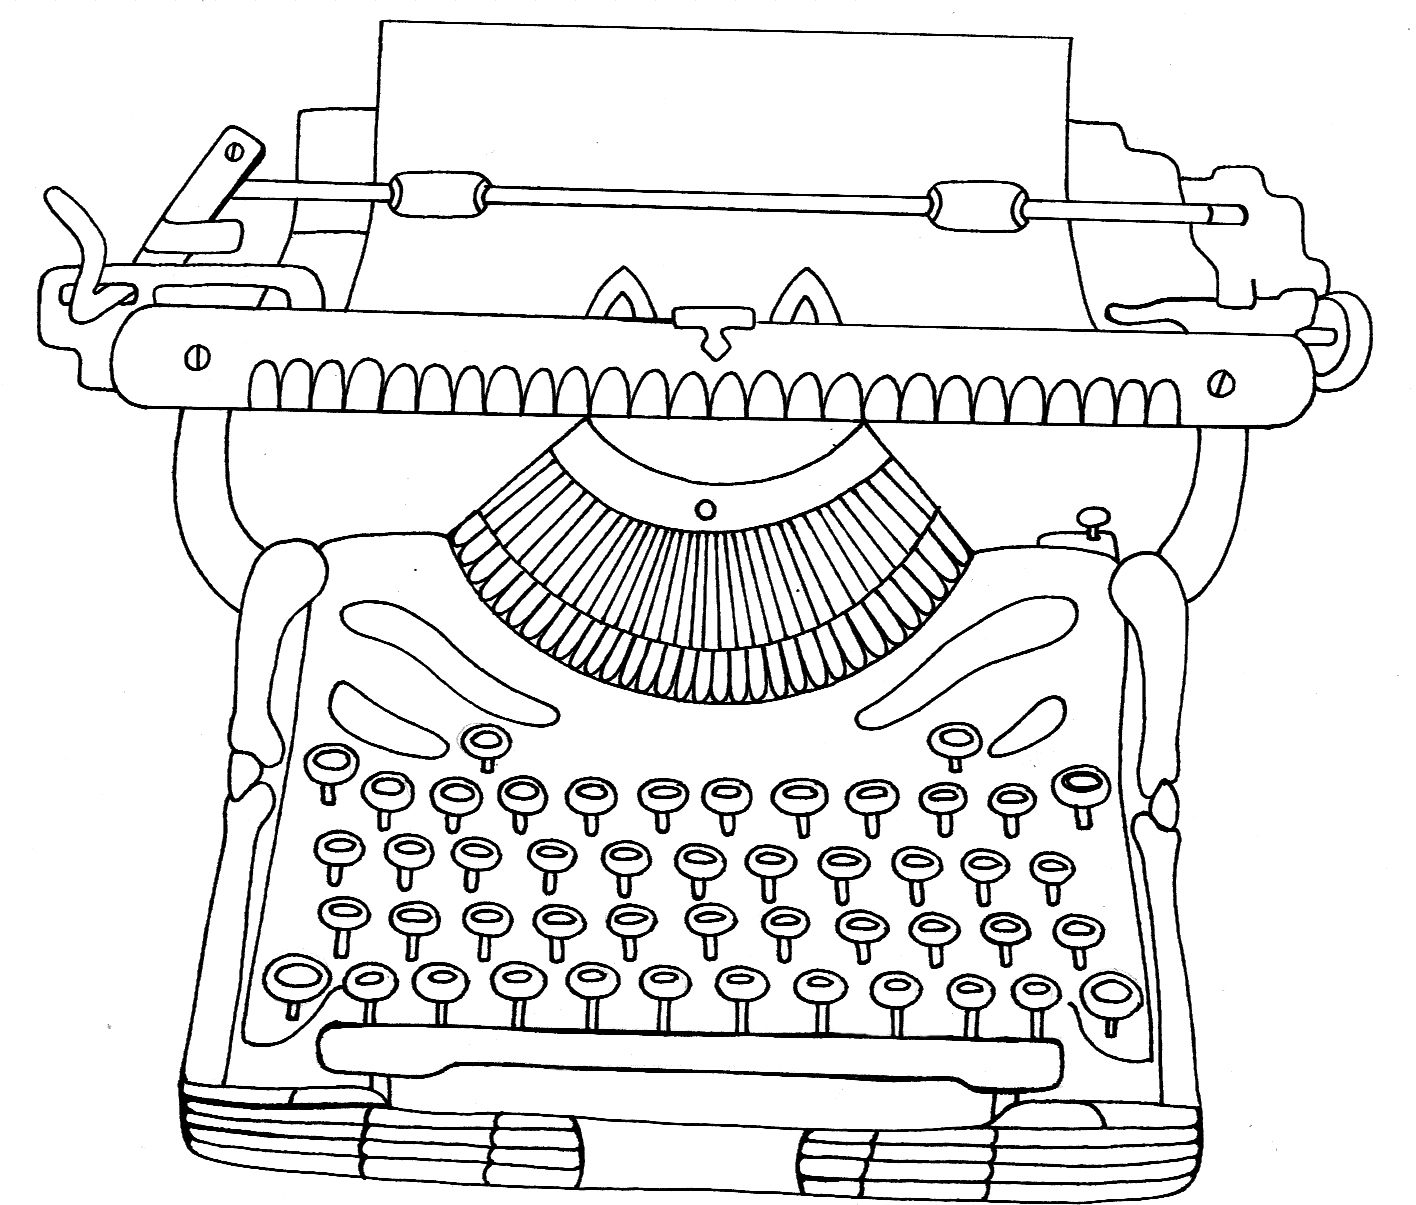 Yucca Flats, N.M.: Wenchkin's Coloring Pages - Dia de los Typerwriter